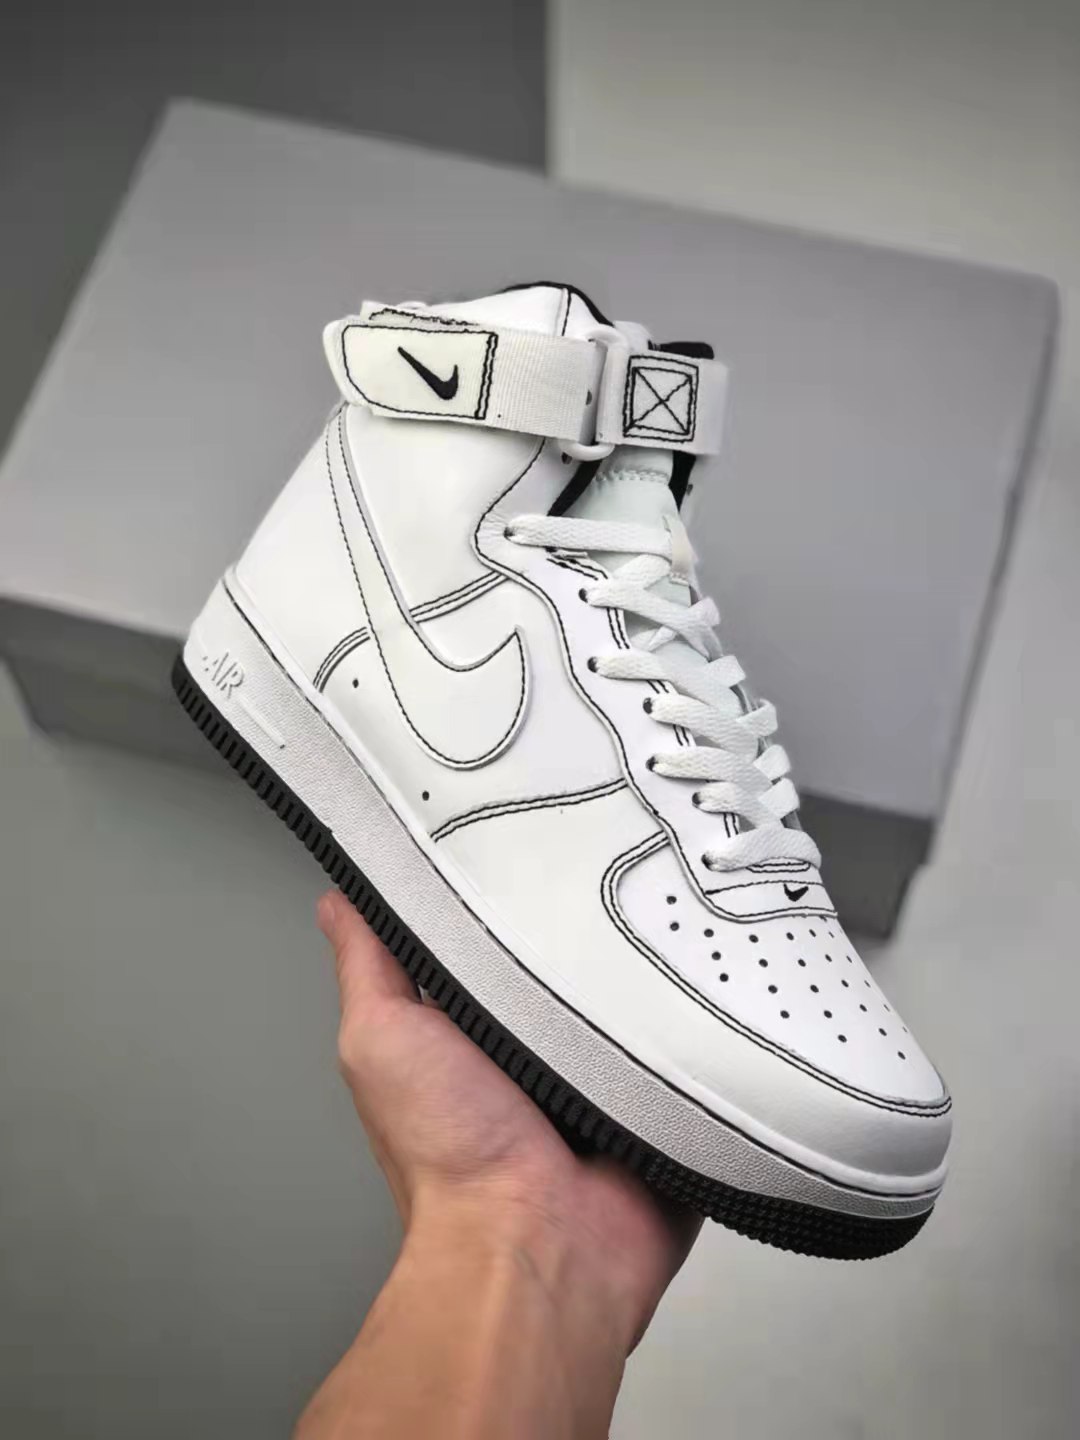 Nike Air Force 1 High 07 White Black CV1753-104 - Stylish and Classic Sneakers